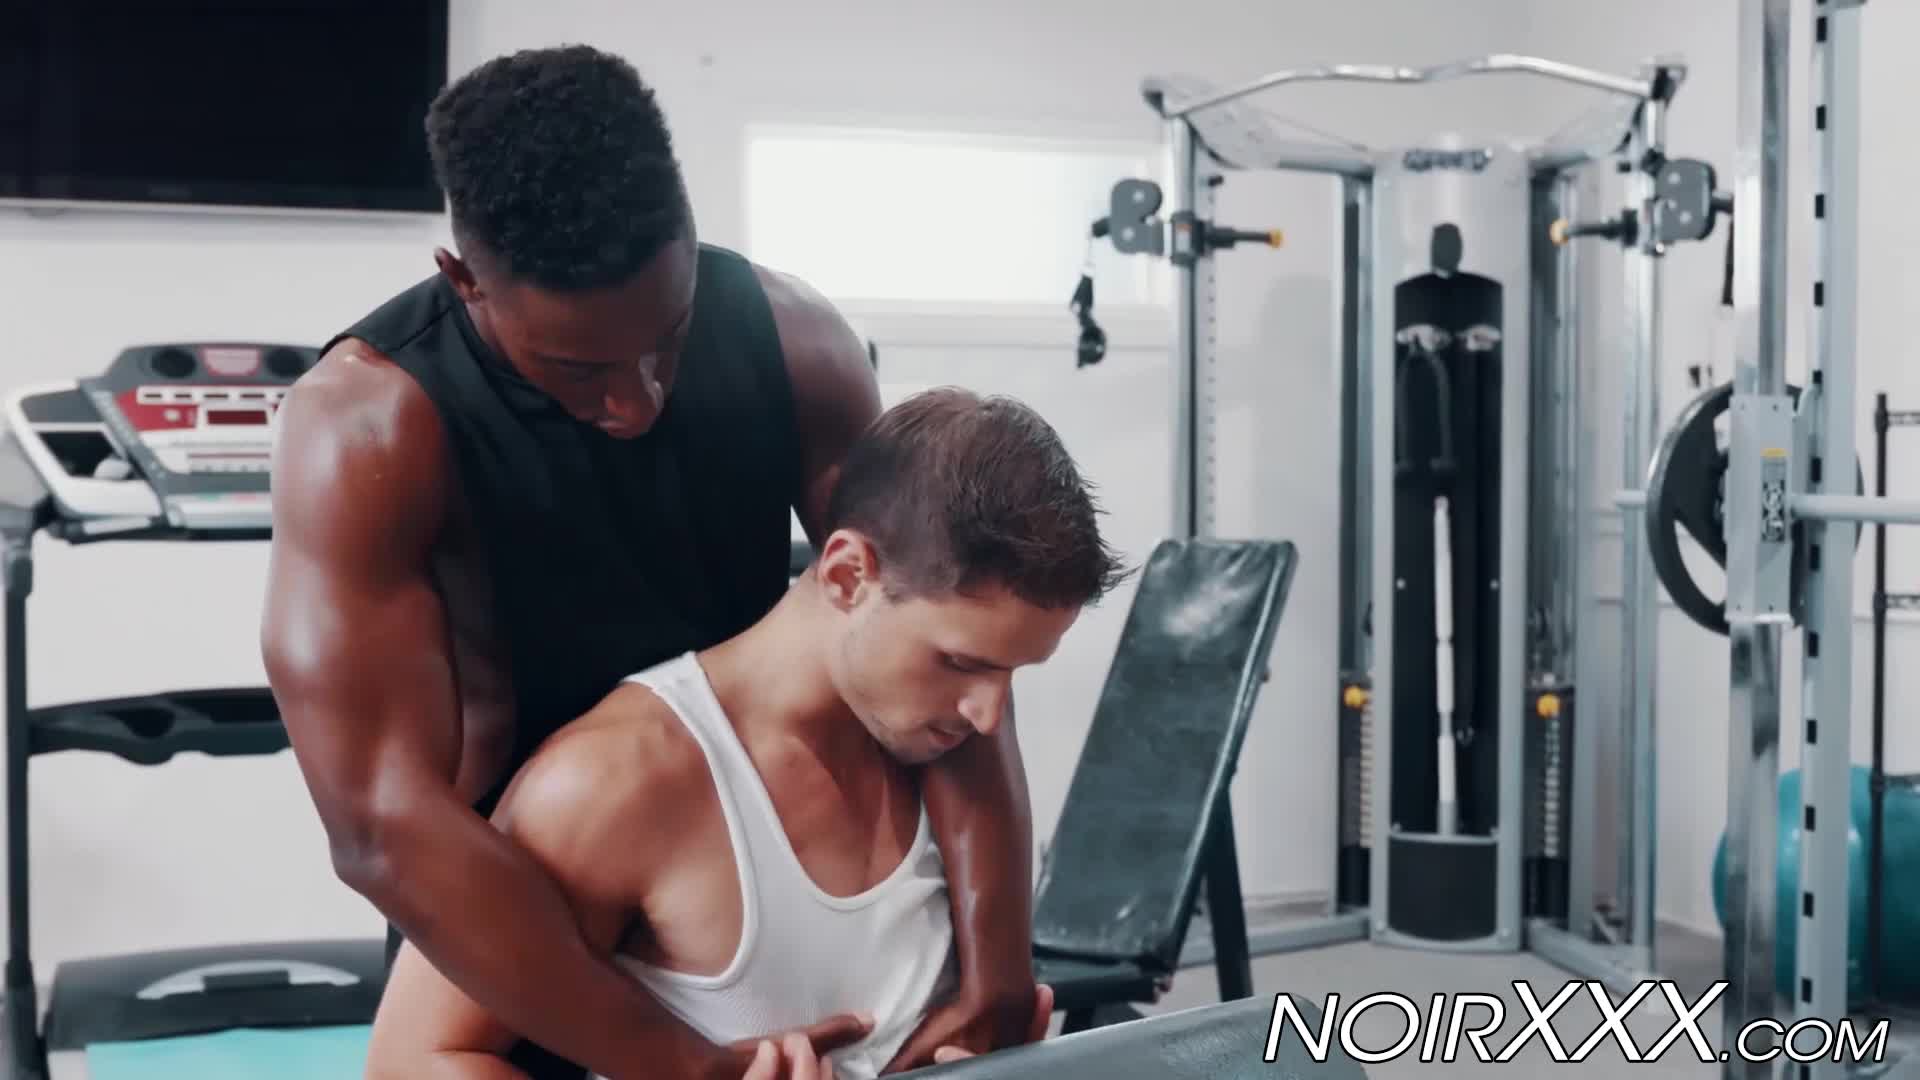 Handsome dude seduced and fucked by his muscular black trainer